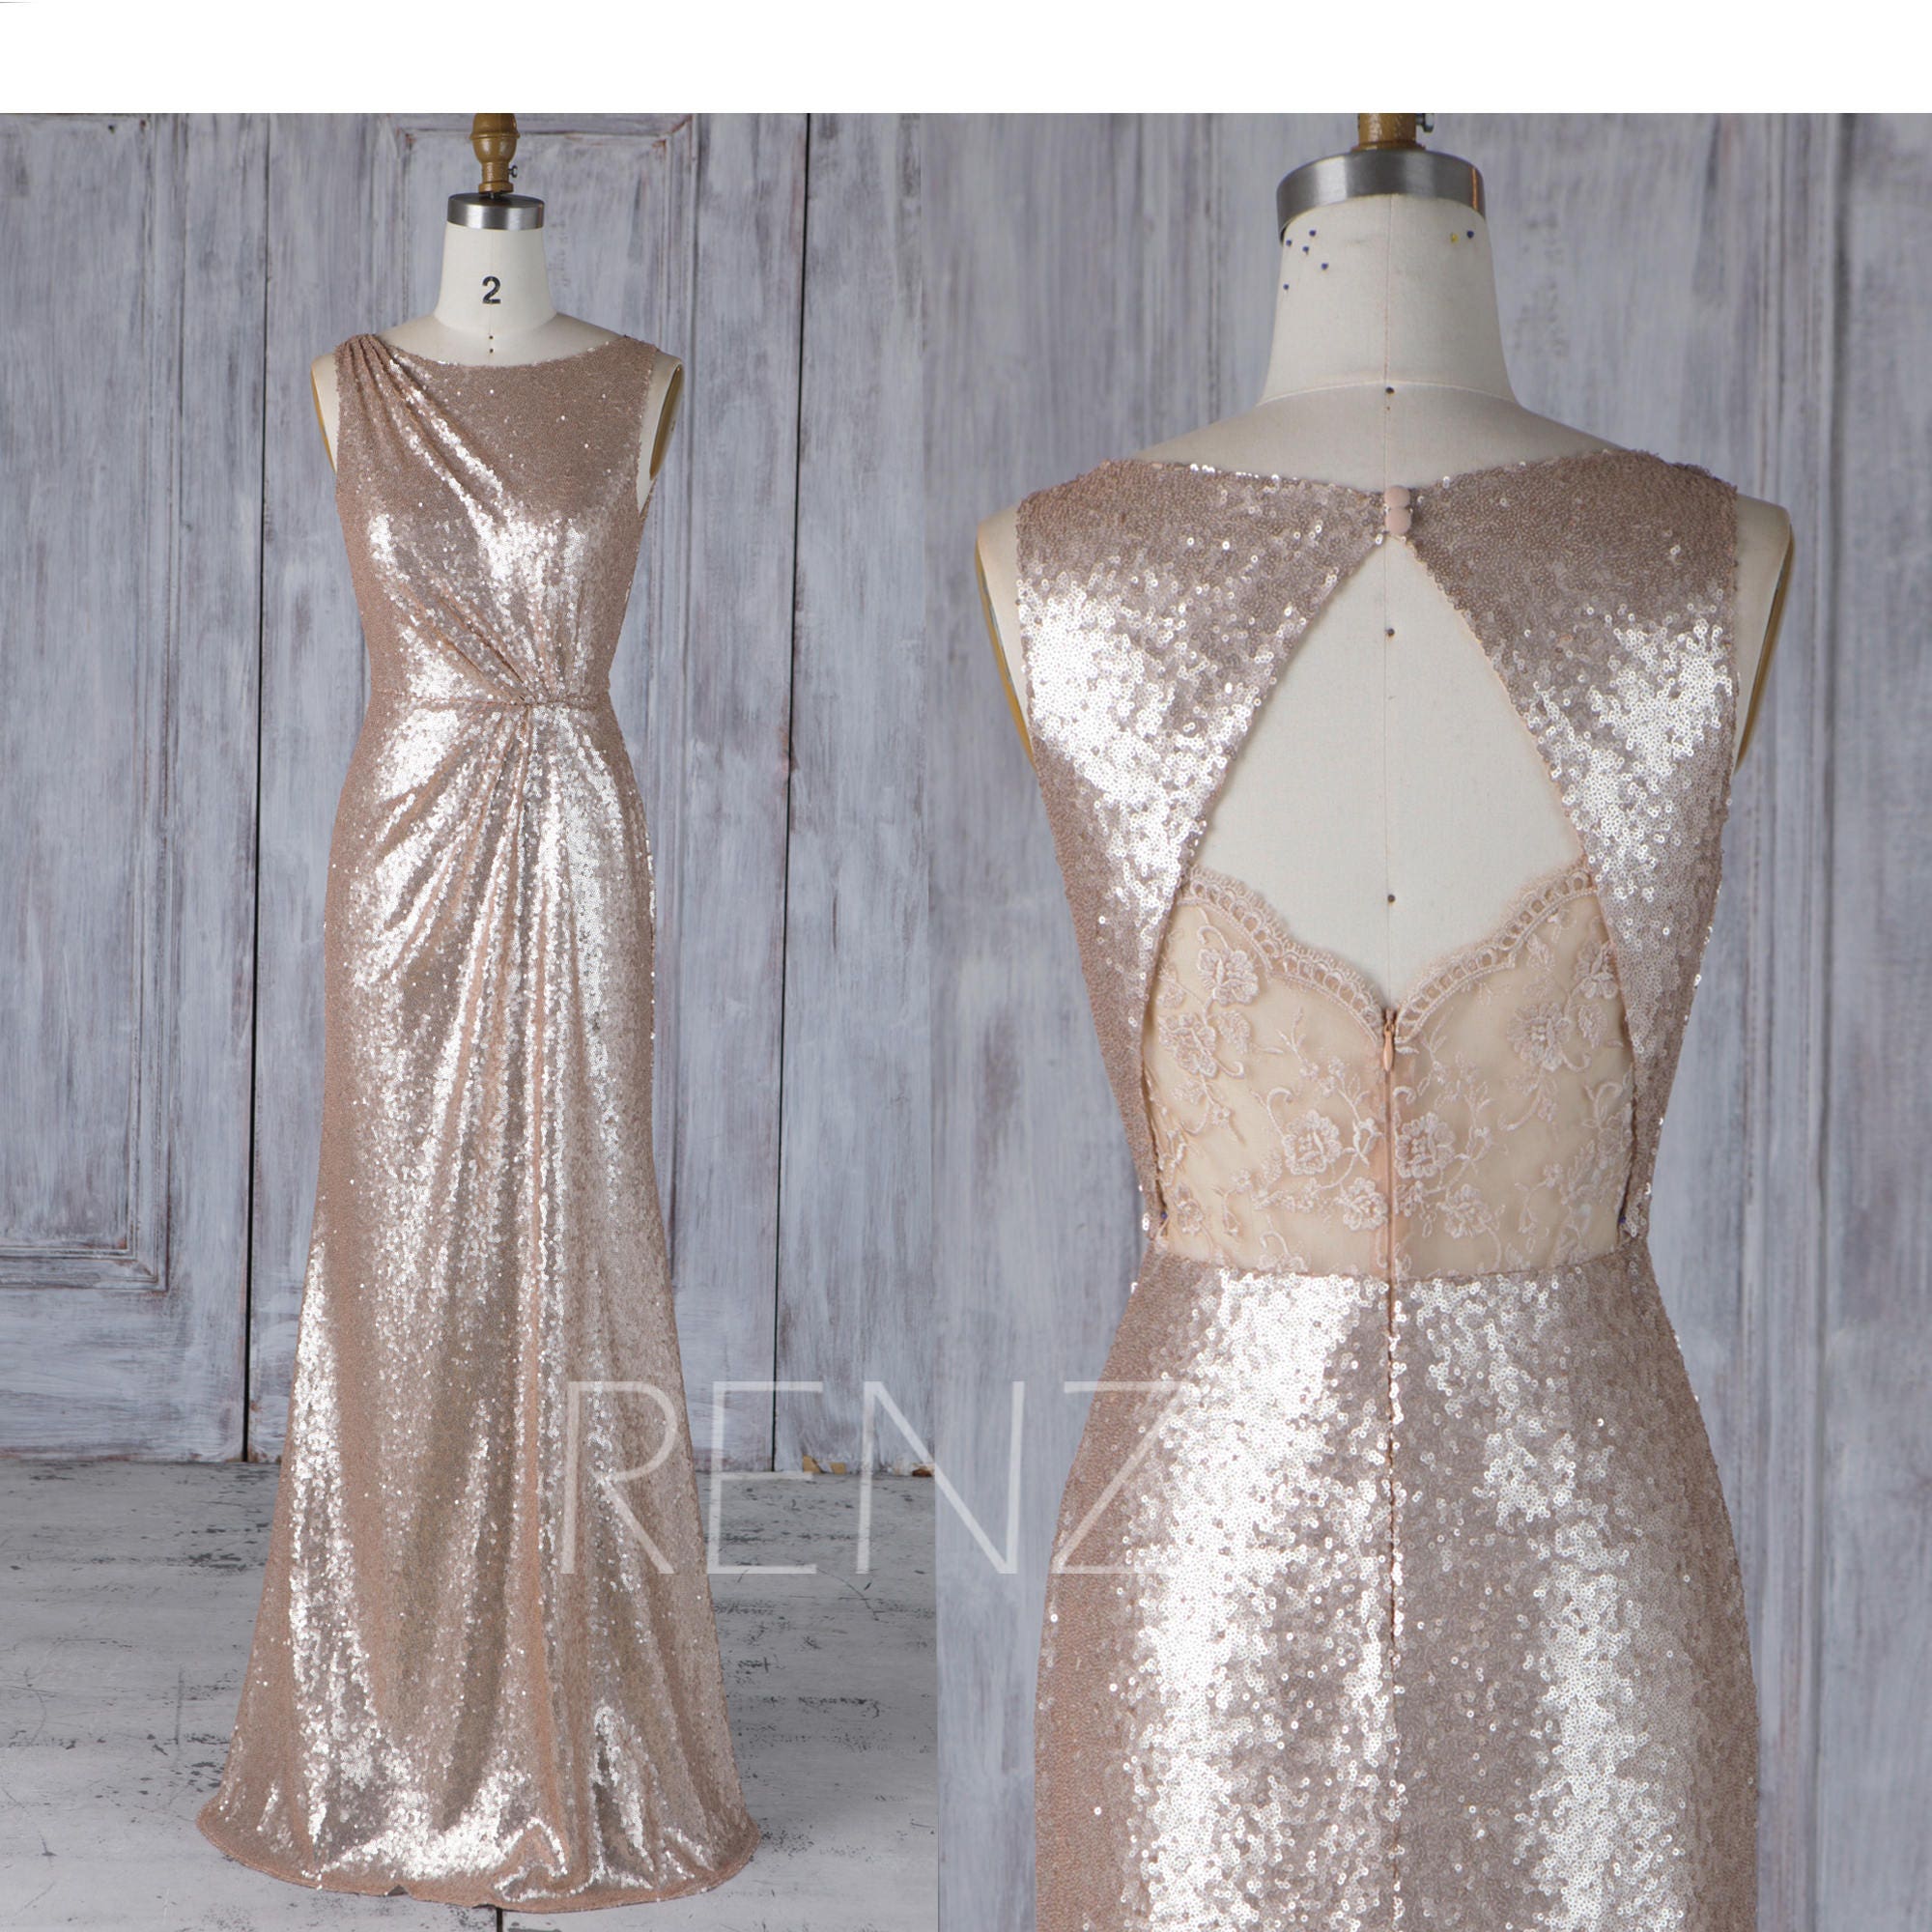 Bridesmaid Dress Tan Sequin Wedding Dress Fitted Formal Dress | Etsy